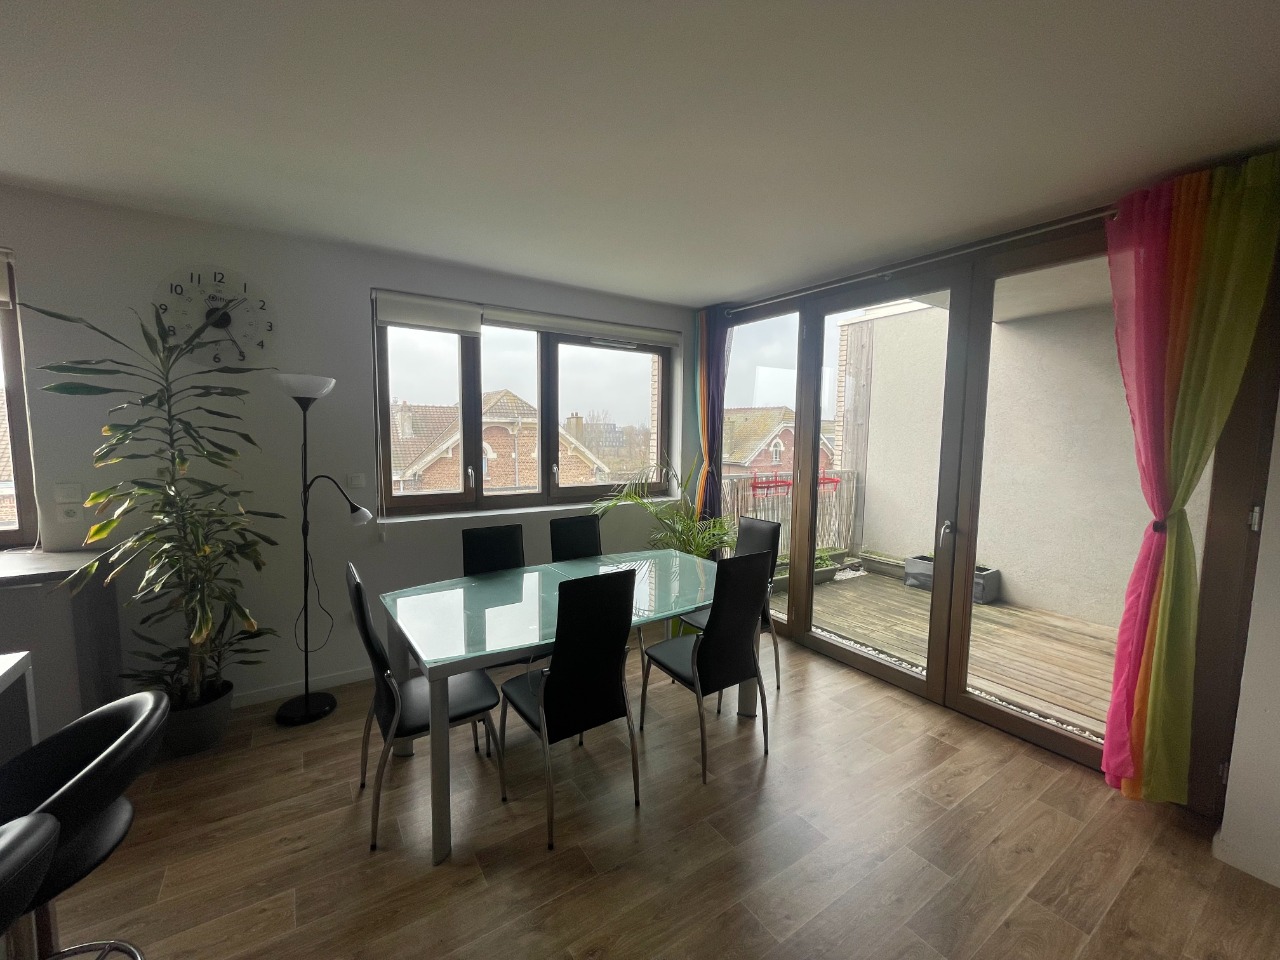 Euratechnologies t3 meuble terrasse parking Photo 9 - JLW Immobilier